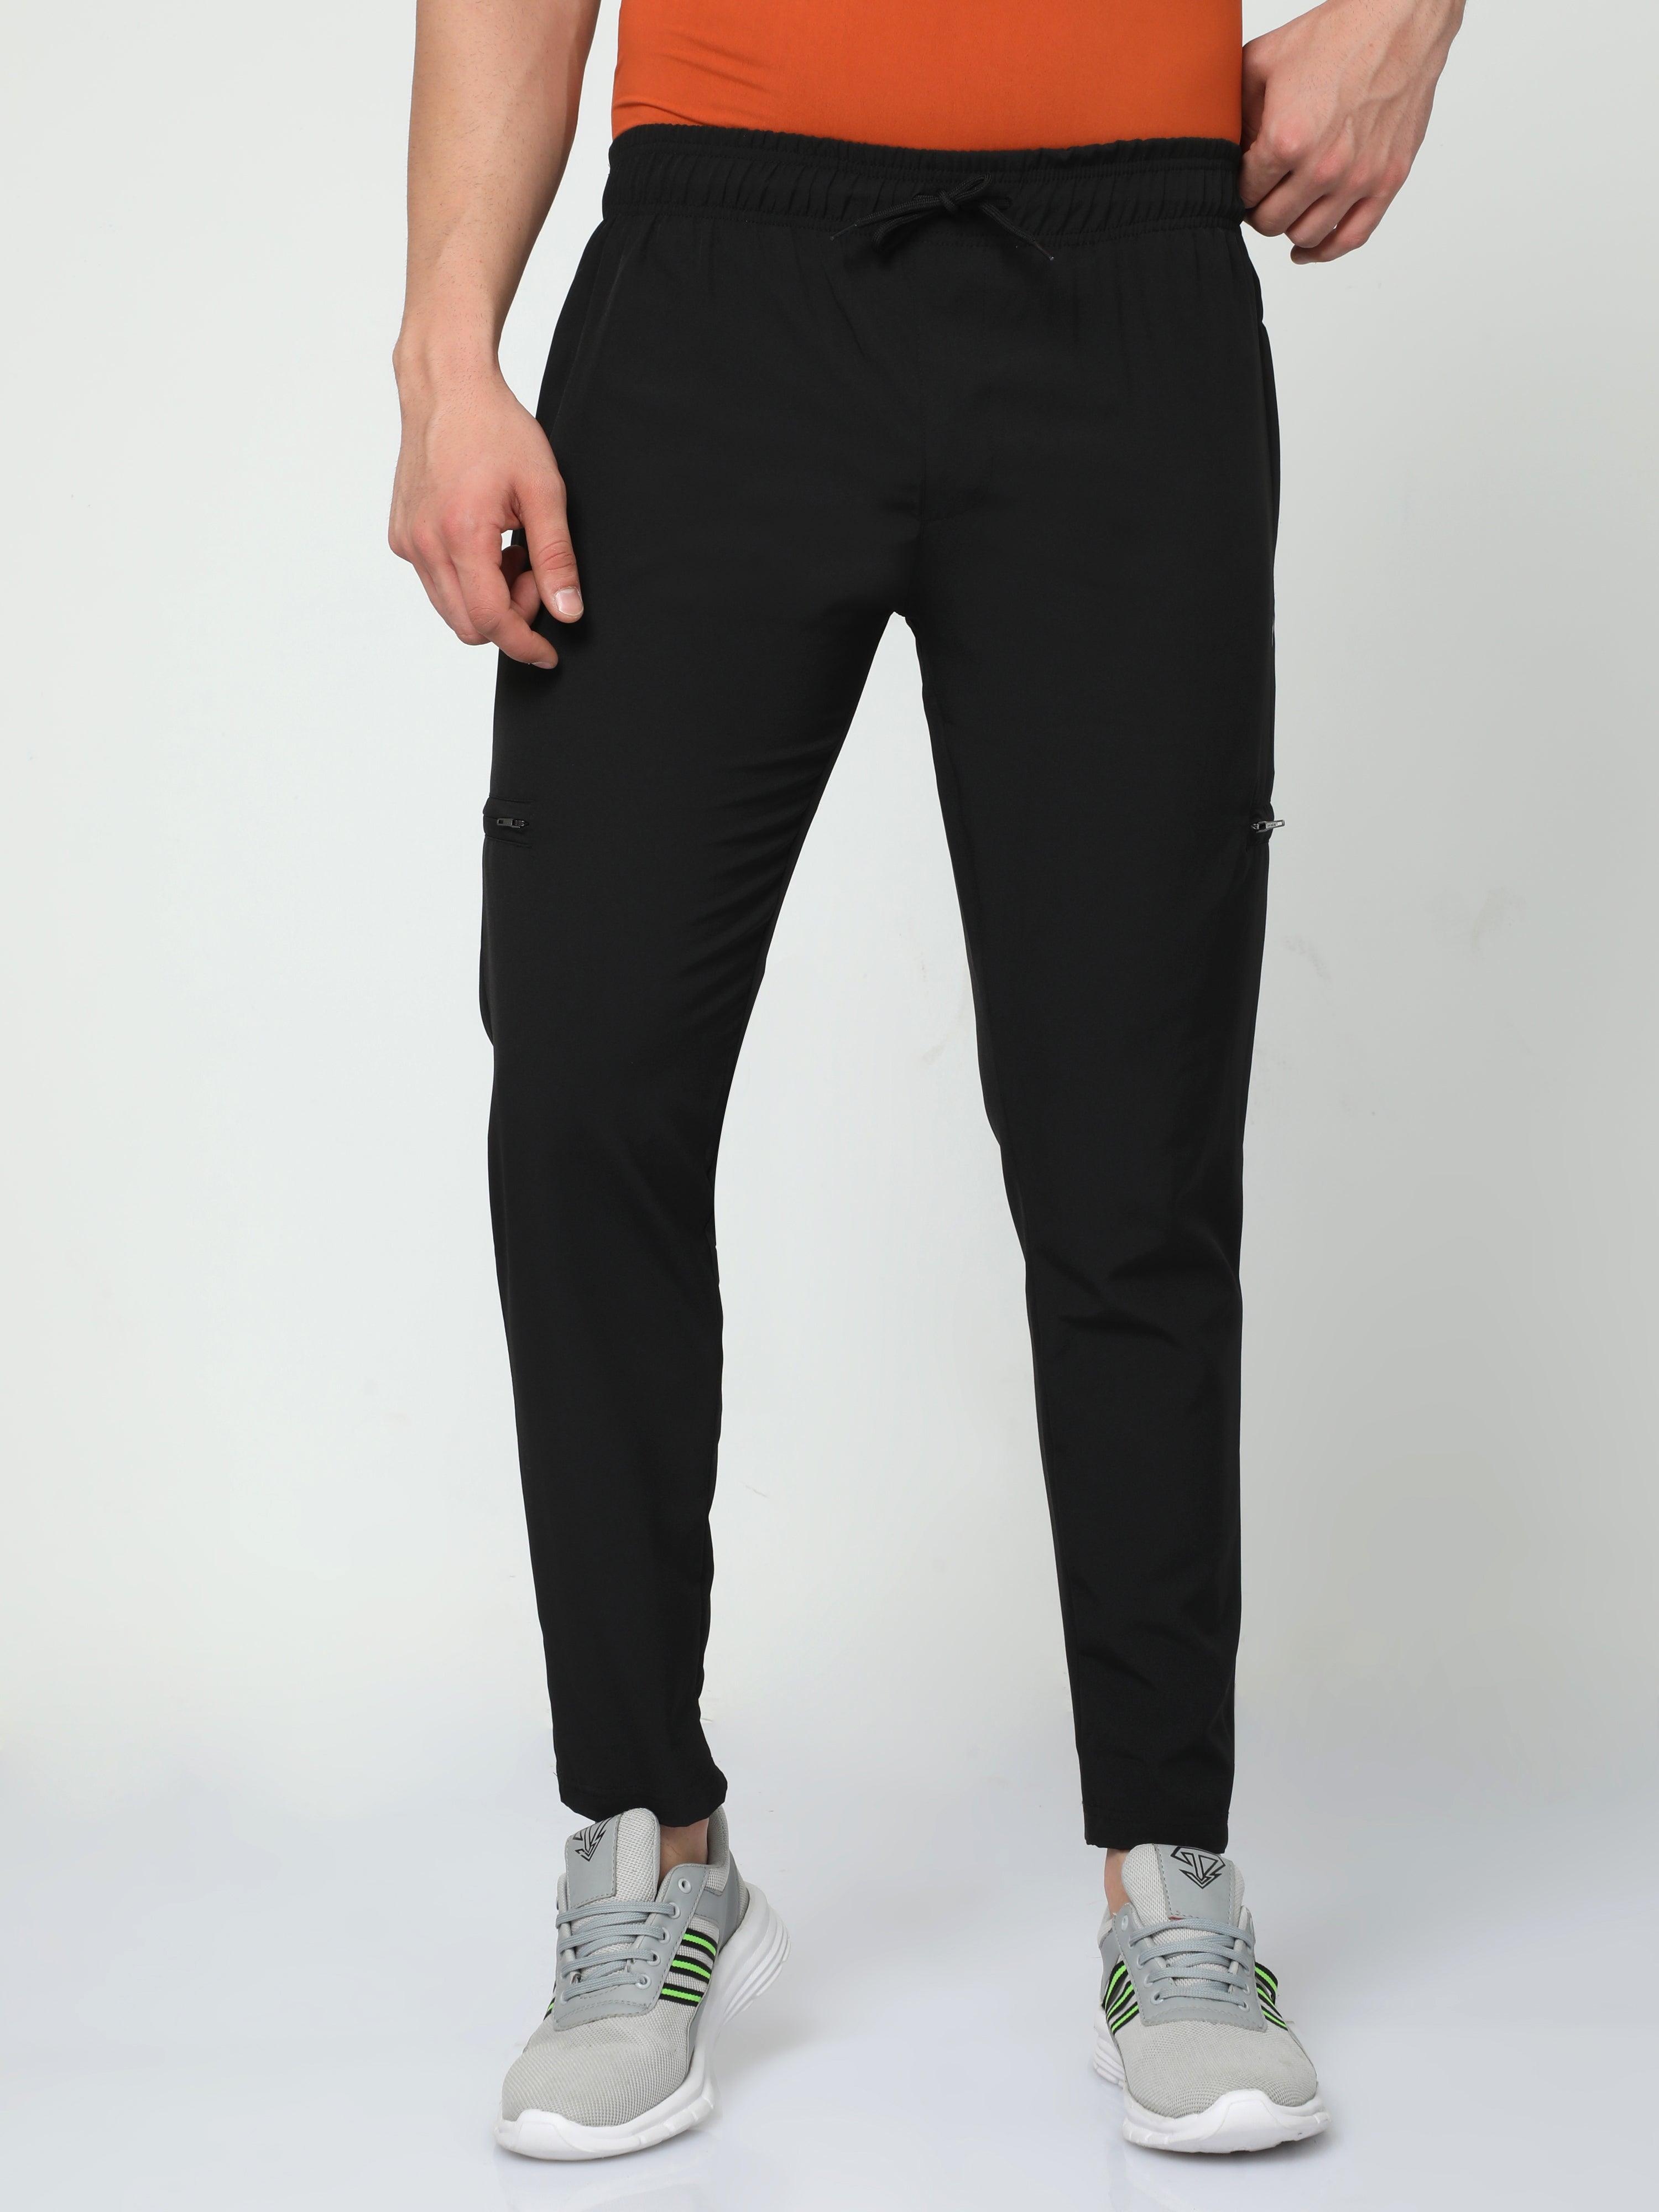 Which is better, grey or black sweatpants? - Quora